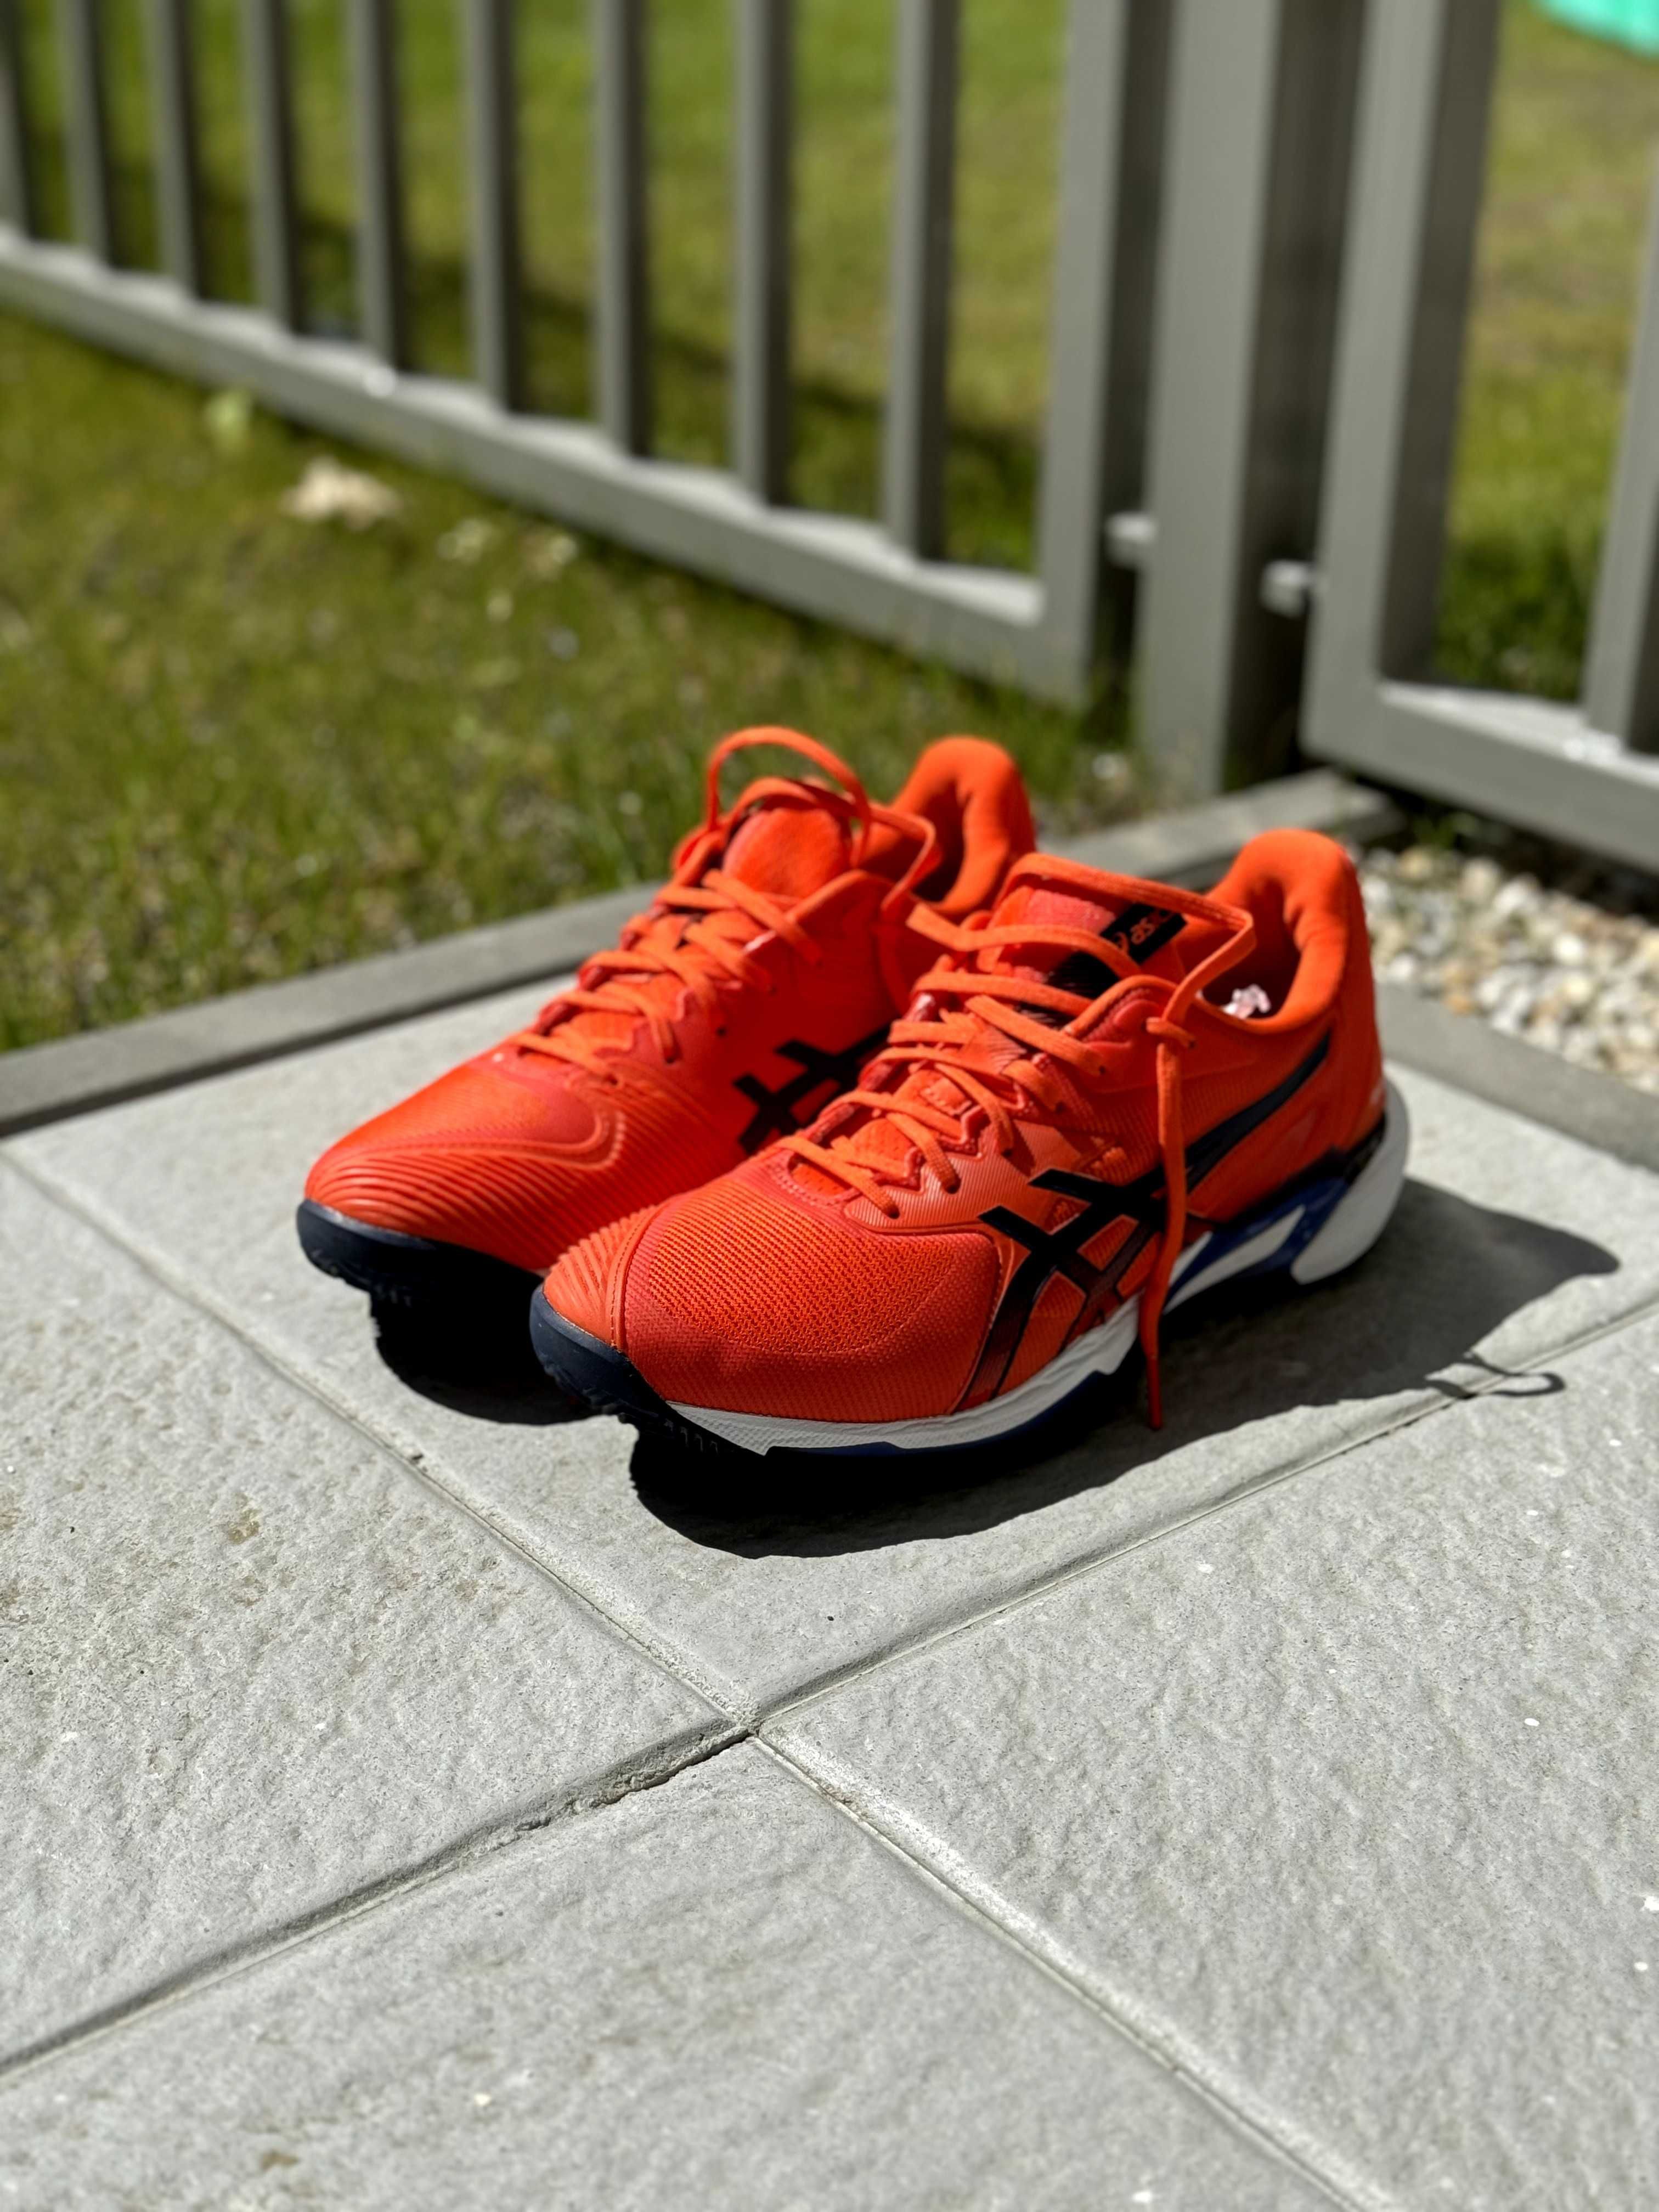 ASICS Solution Speed FF 3 Clay